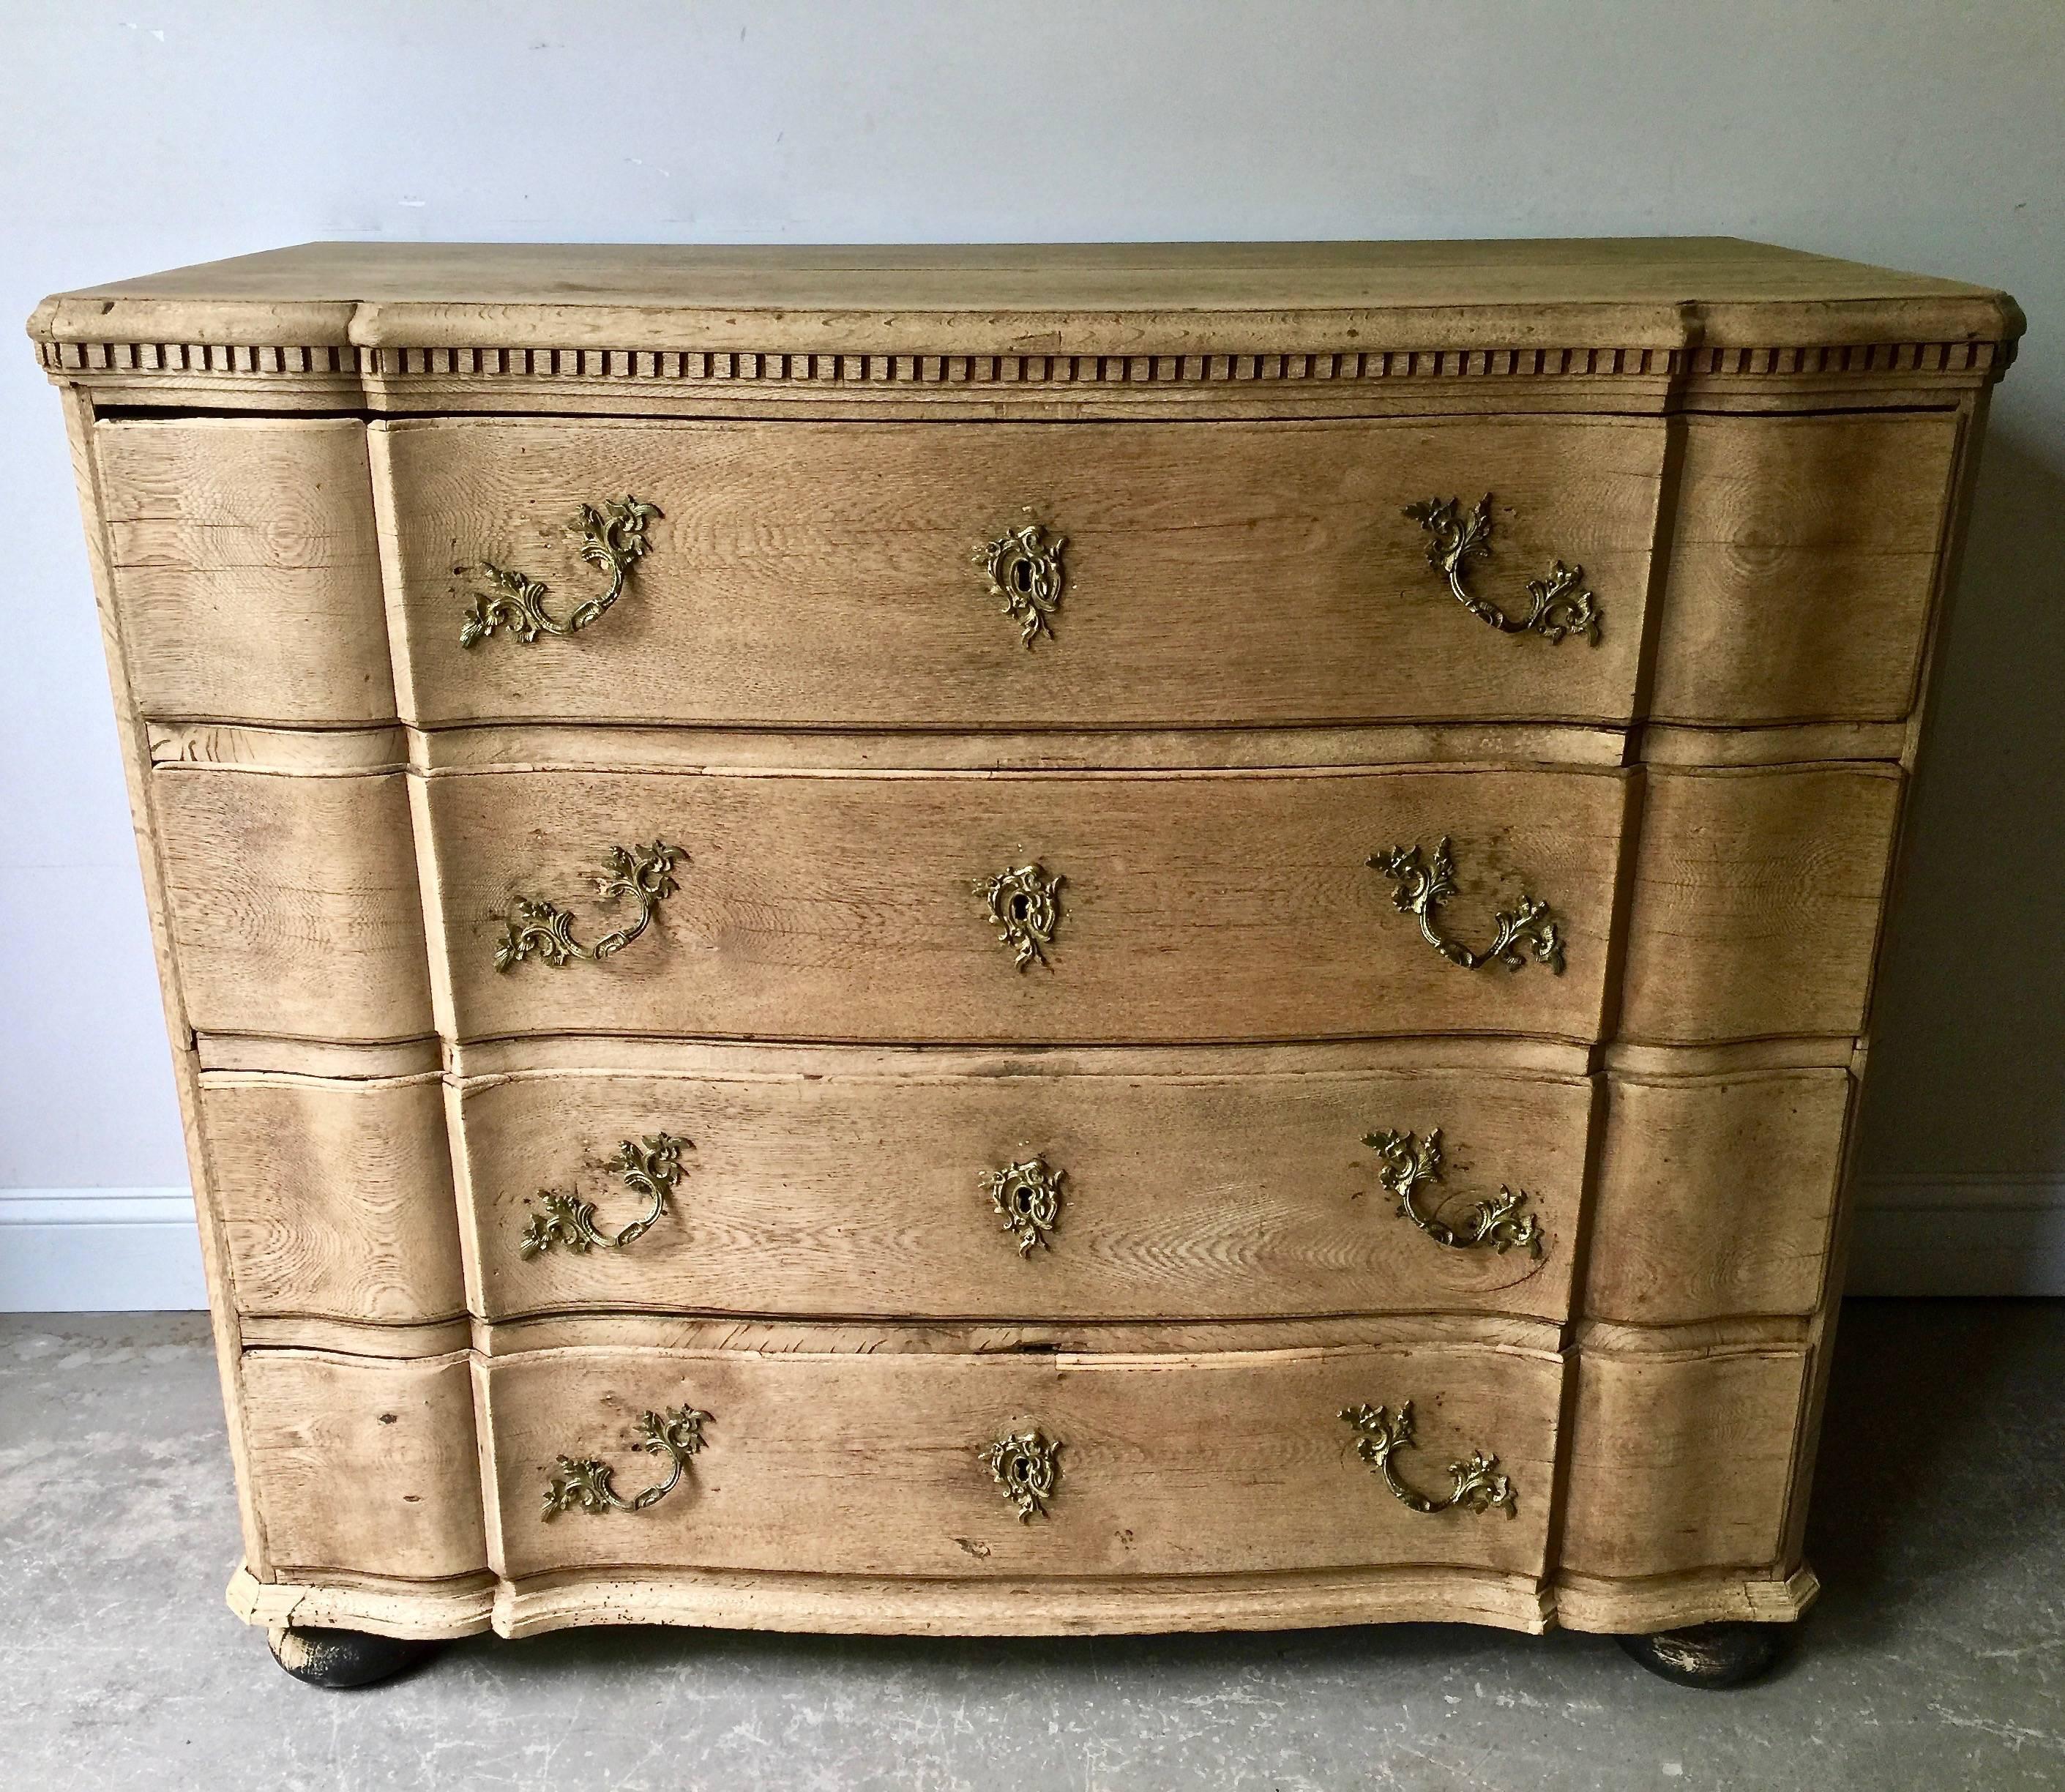 19th century chest of drawers in richly carved bleached oak with curvaceous serpentine drawer fronts, handsome bronze hardwares and shaped top with dental decorations. The chest is in two parts with original large handsome handles for convent